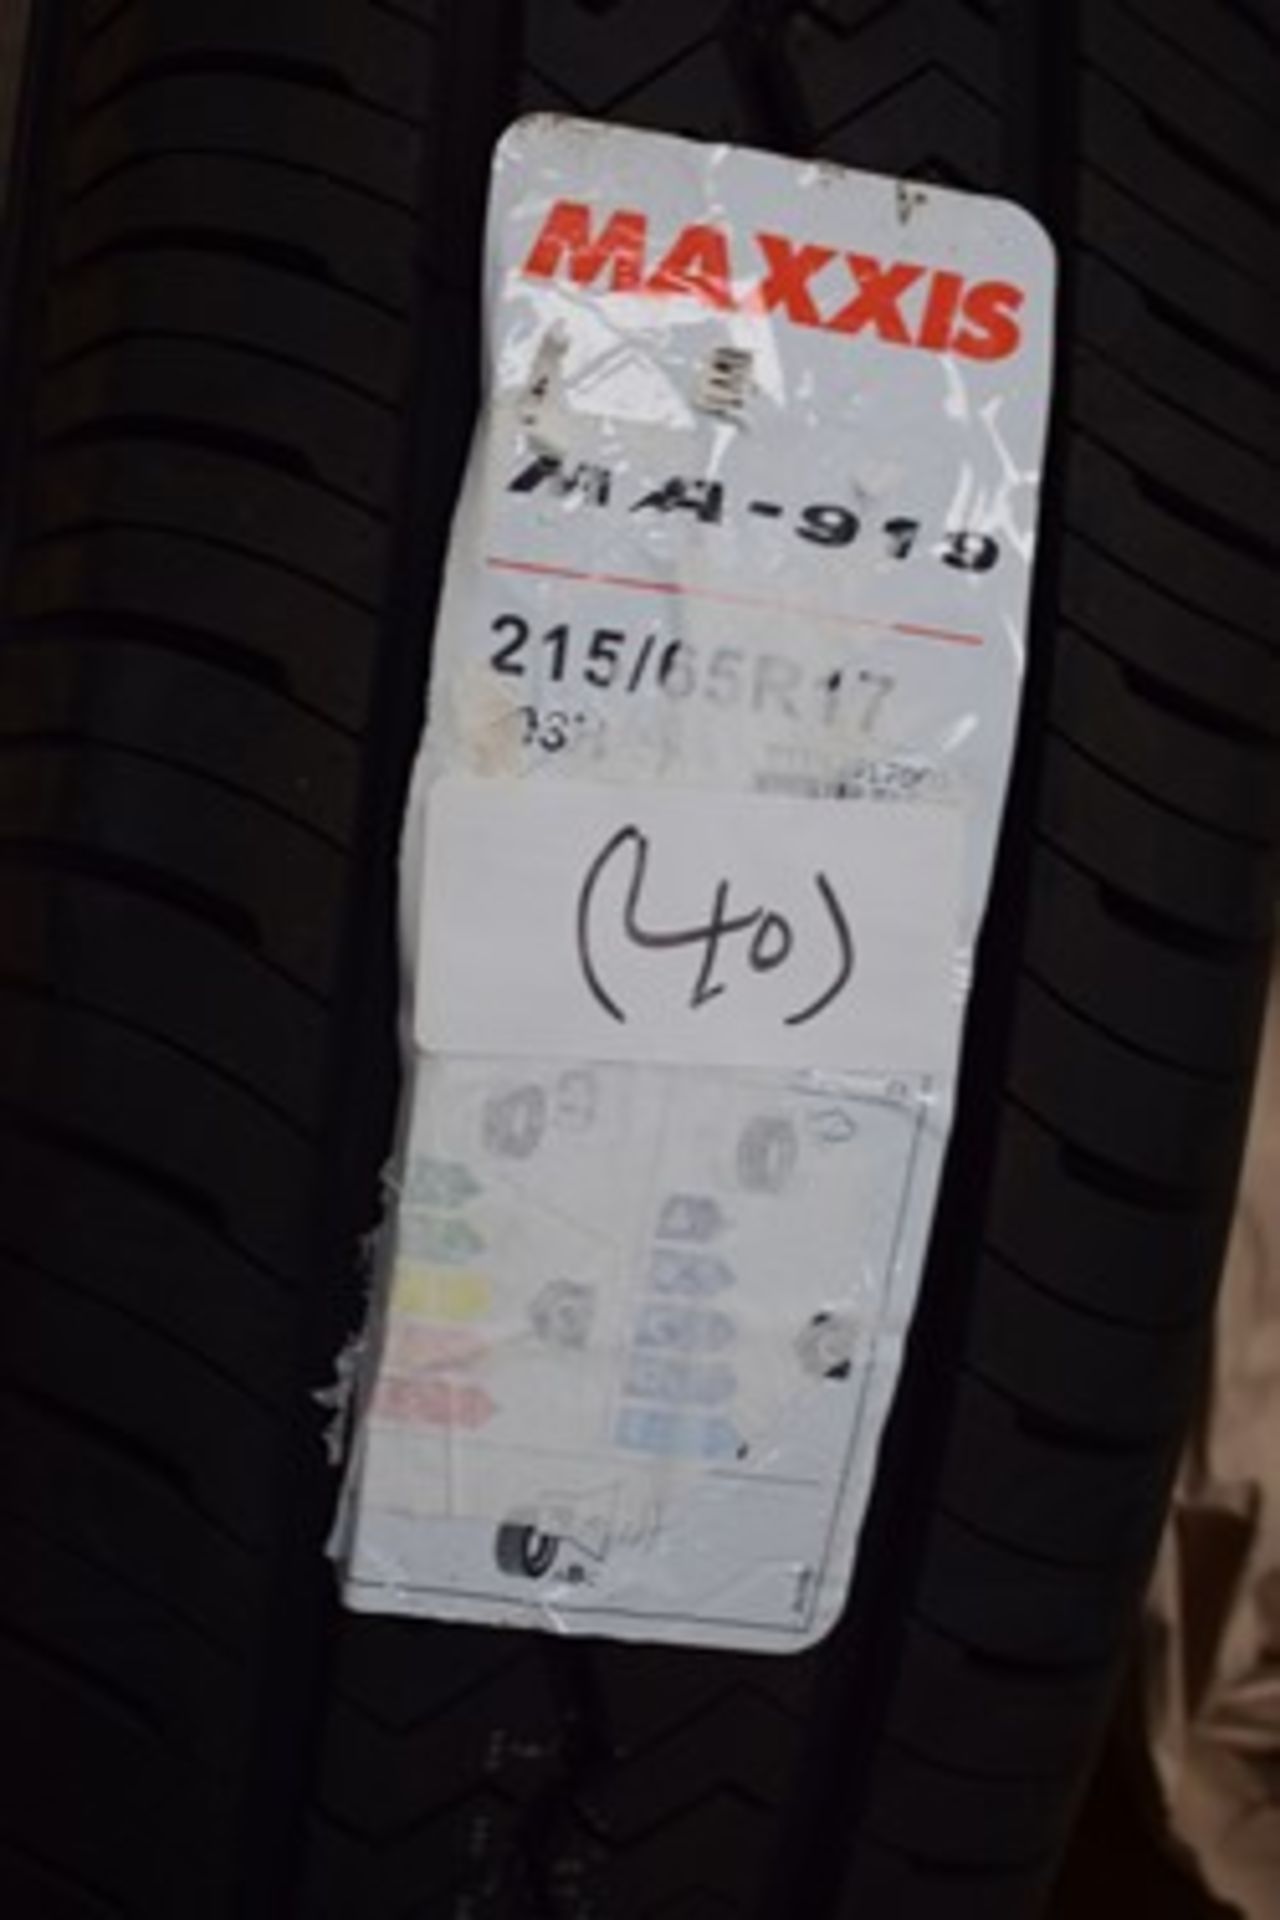 1 x Maxxis MA-919 tyre, size 215/65R17 103H - new with label (C3)(40)